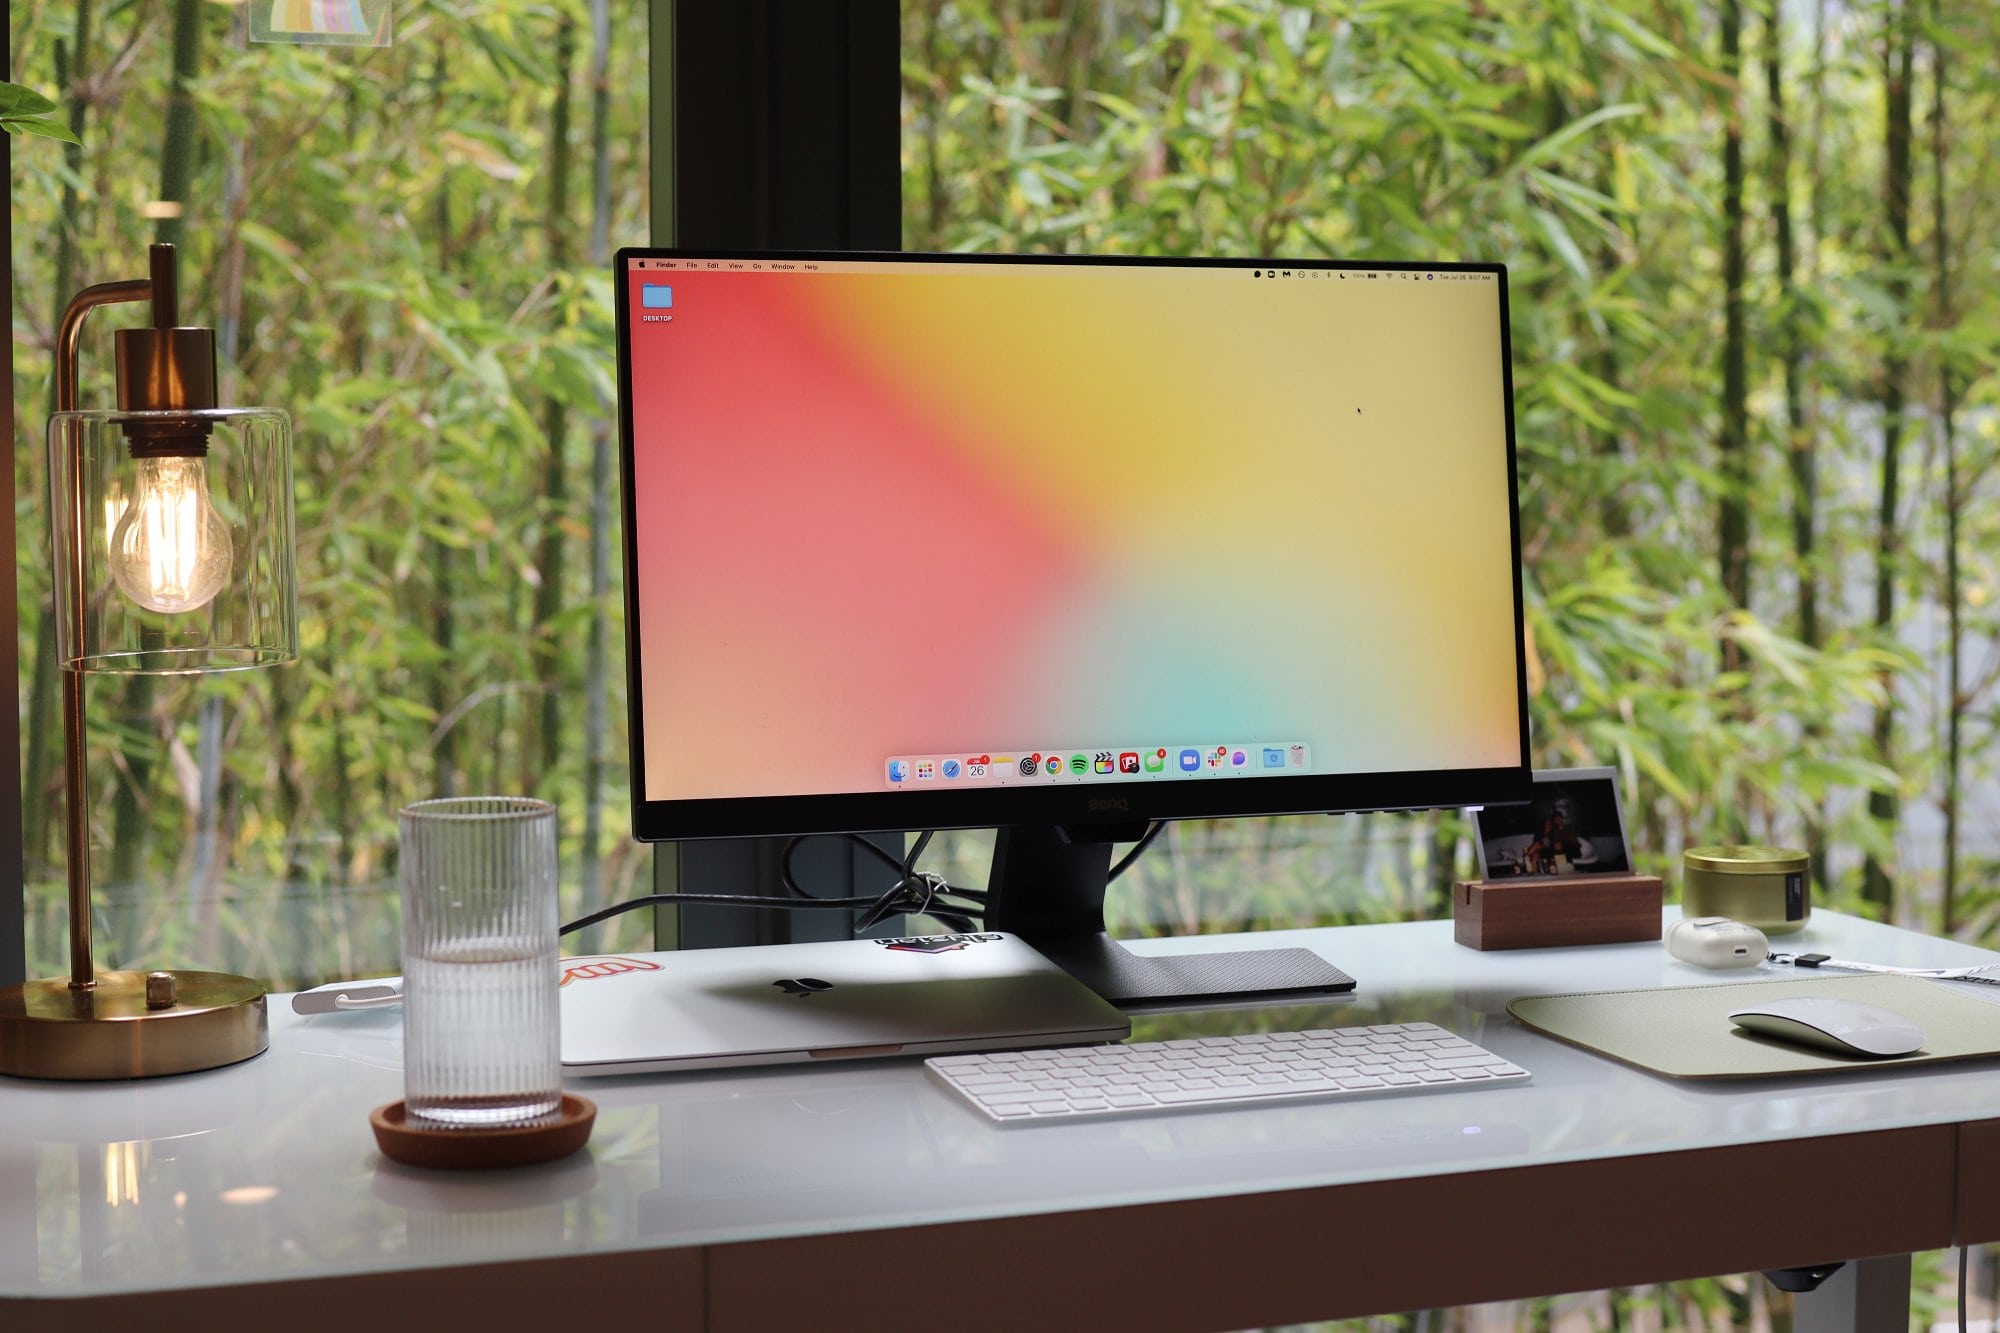 A standing desk with tempered glass